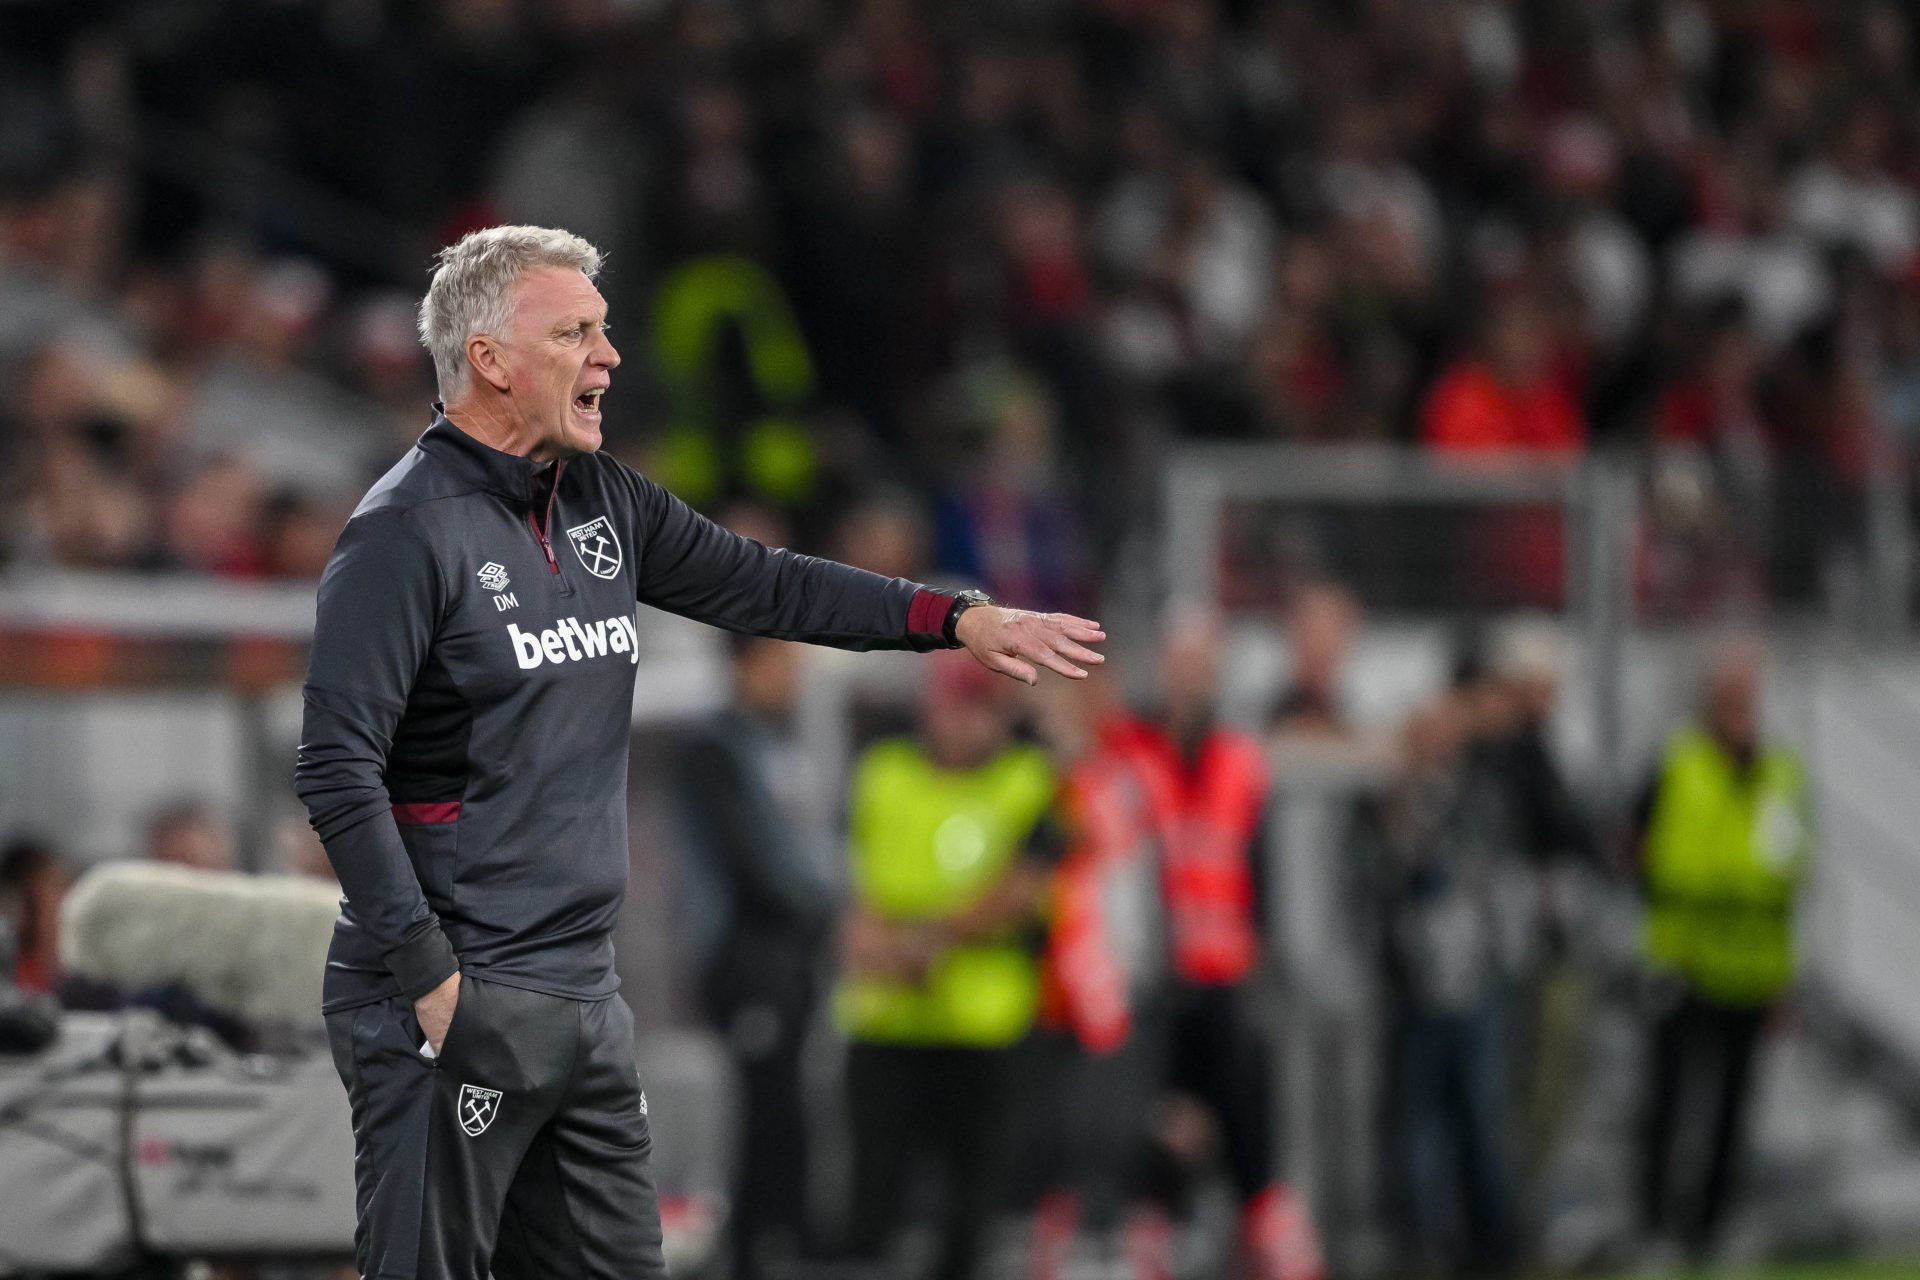 David Moyes is under real pressure at West Ham after fresh Fabrizio Romano claim – view